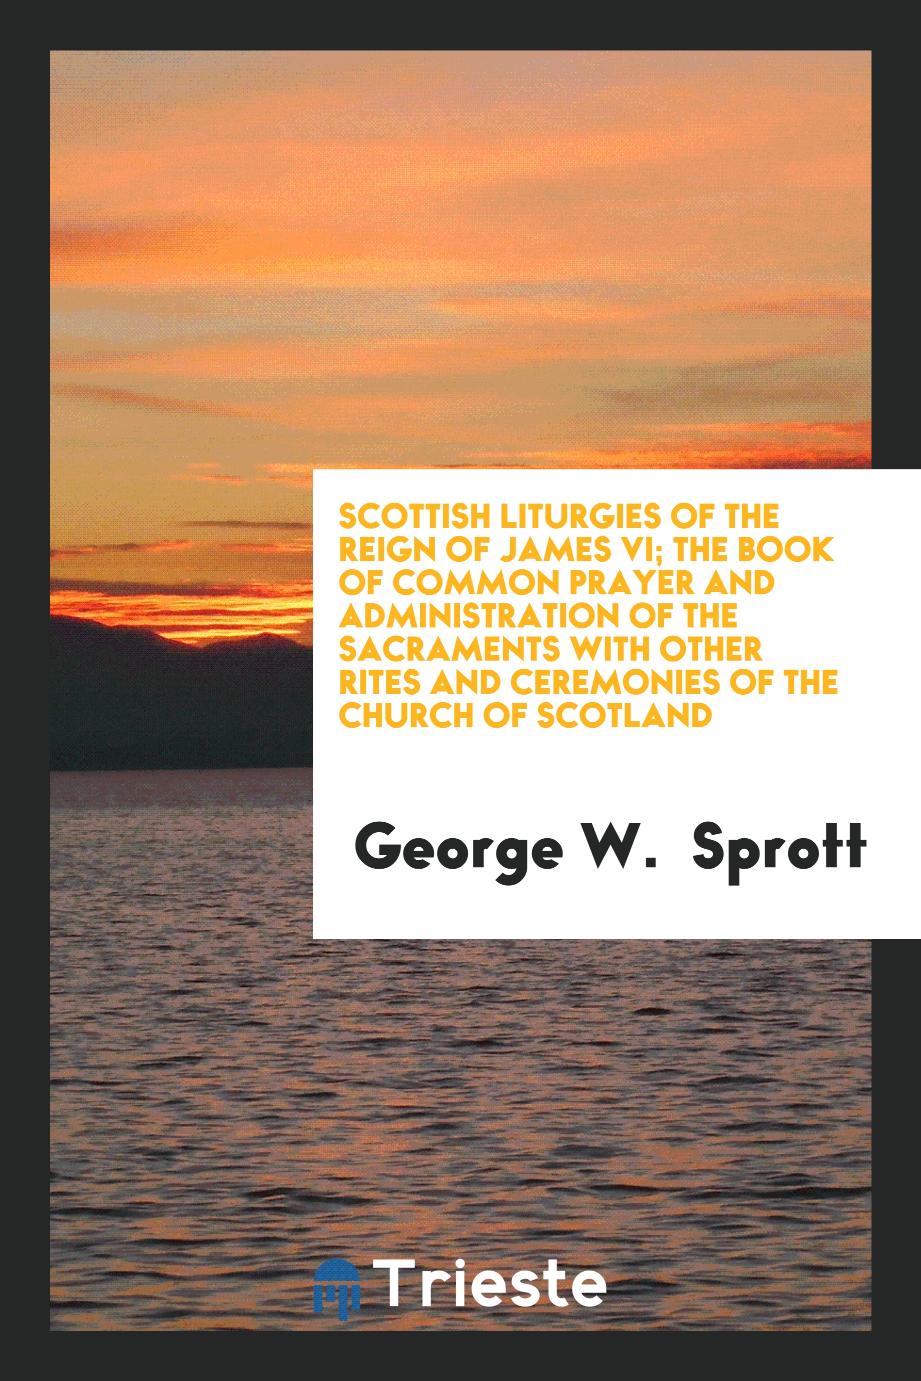 Scottish Liturgies of the Reign of James VI; The Book of Common Prayer and Administration of the Sacraments with Other Rites and Ceremonies of the Church of Scotland